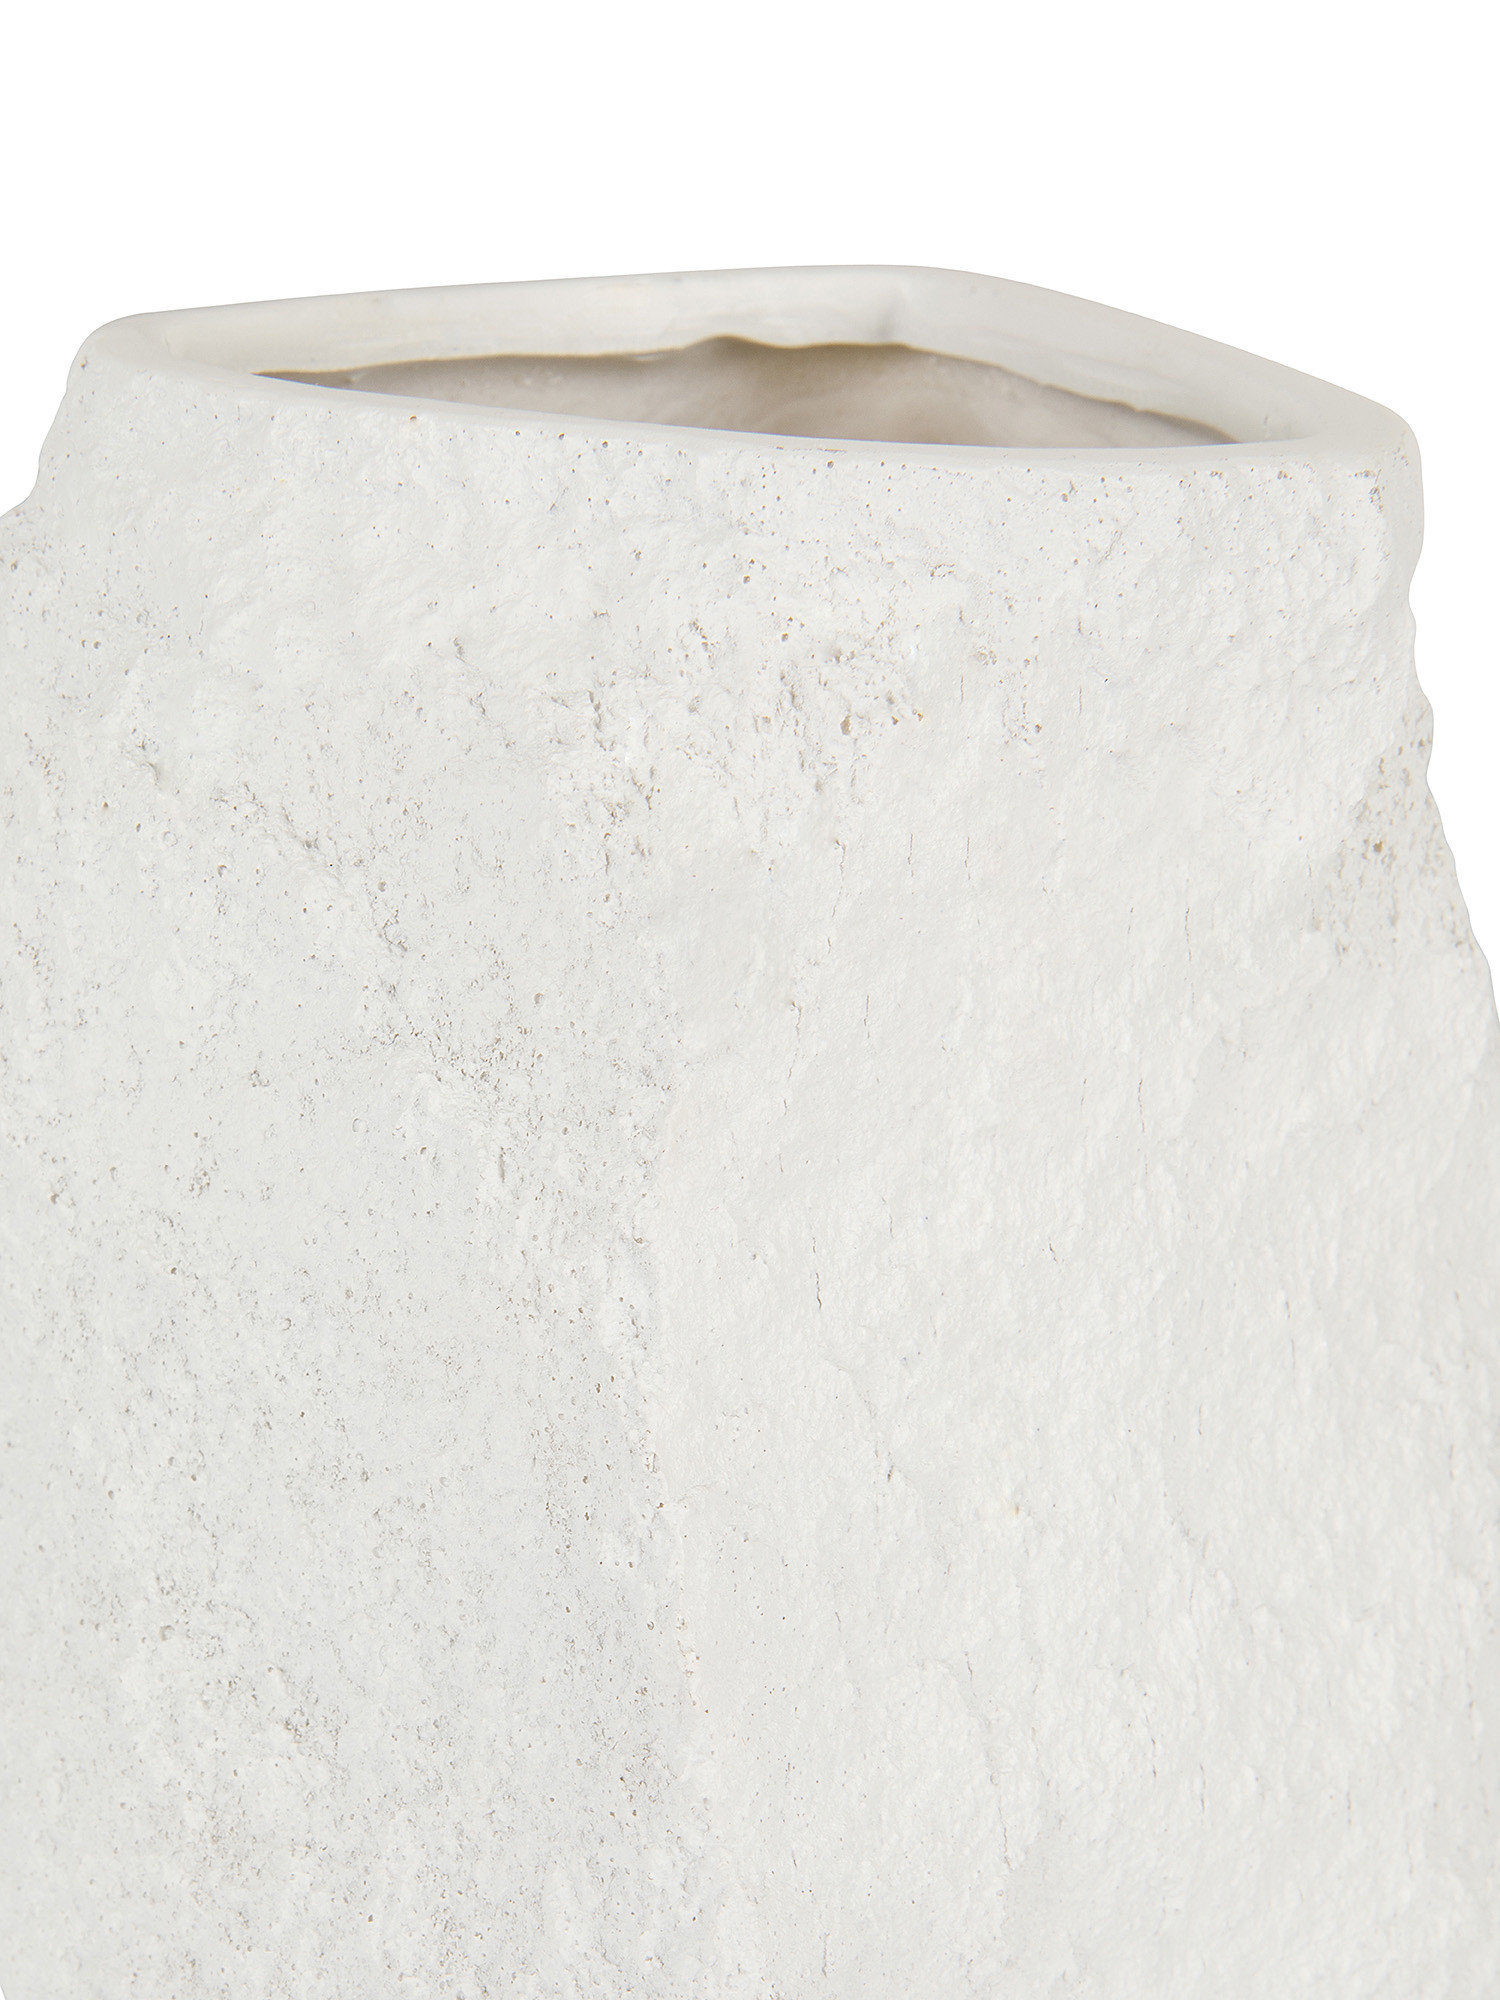 Polyresin vase with rock effect, White, large image number 1